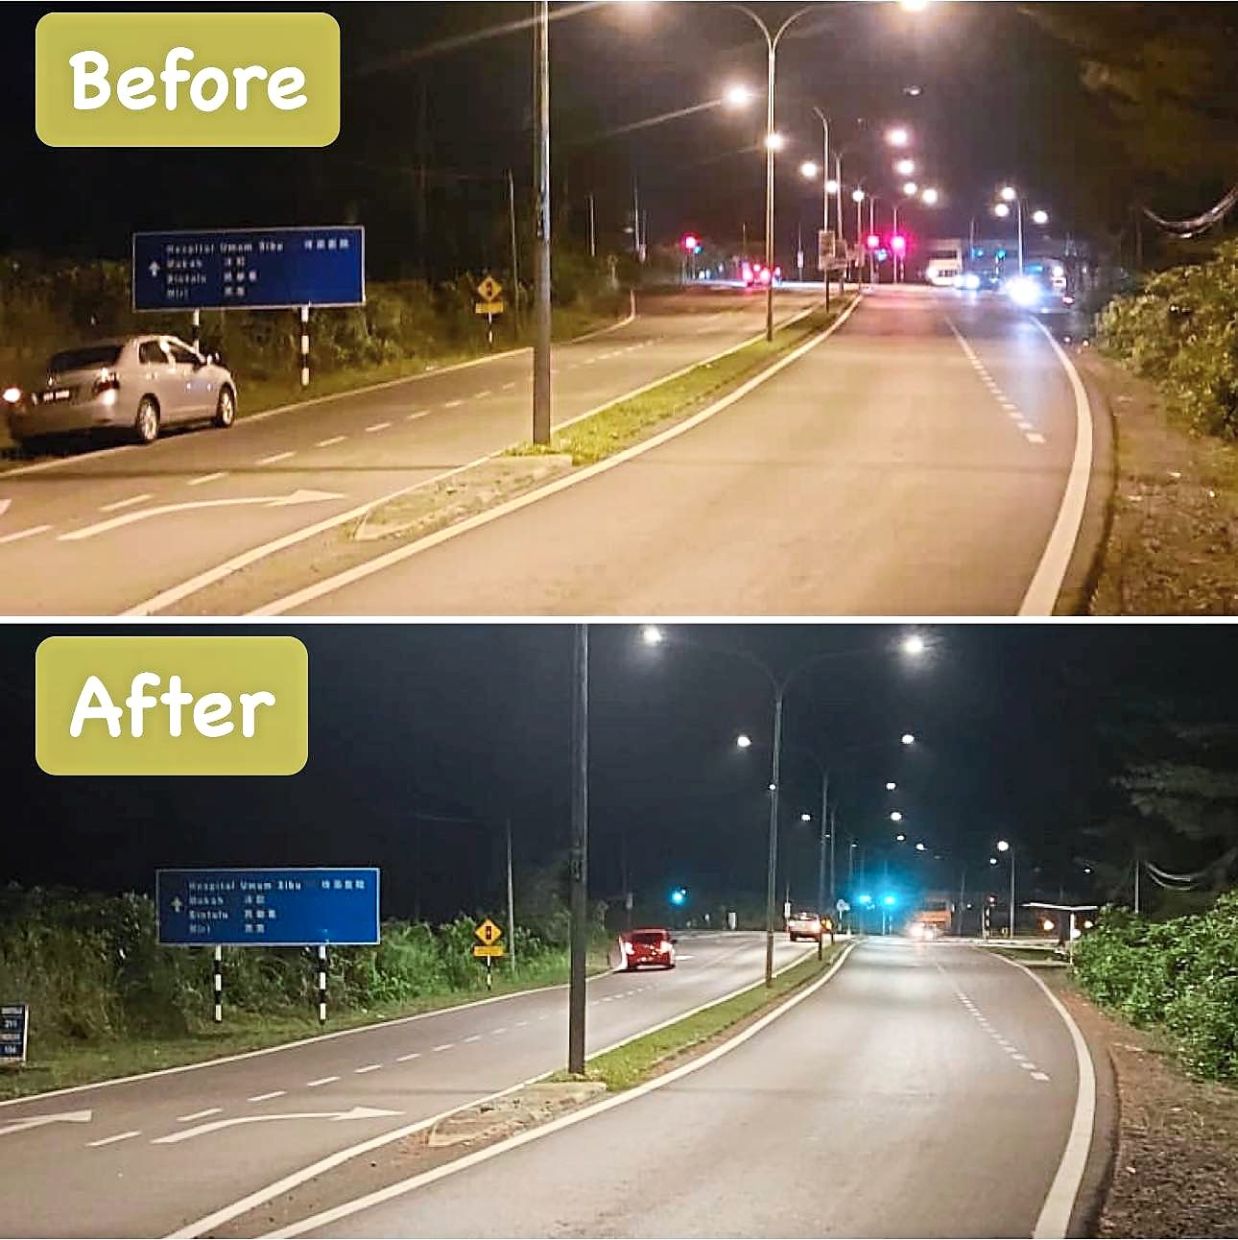 A stretch of road before and after the installation of LED lighting in Sibu.